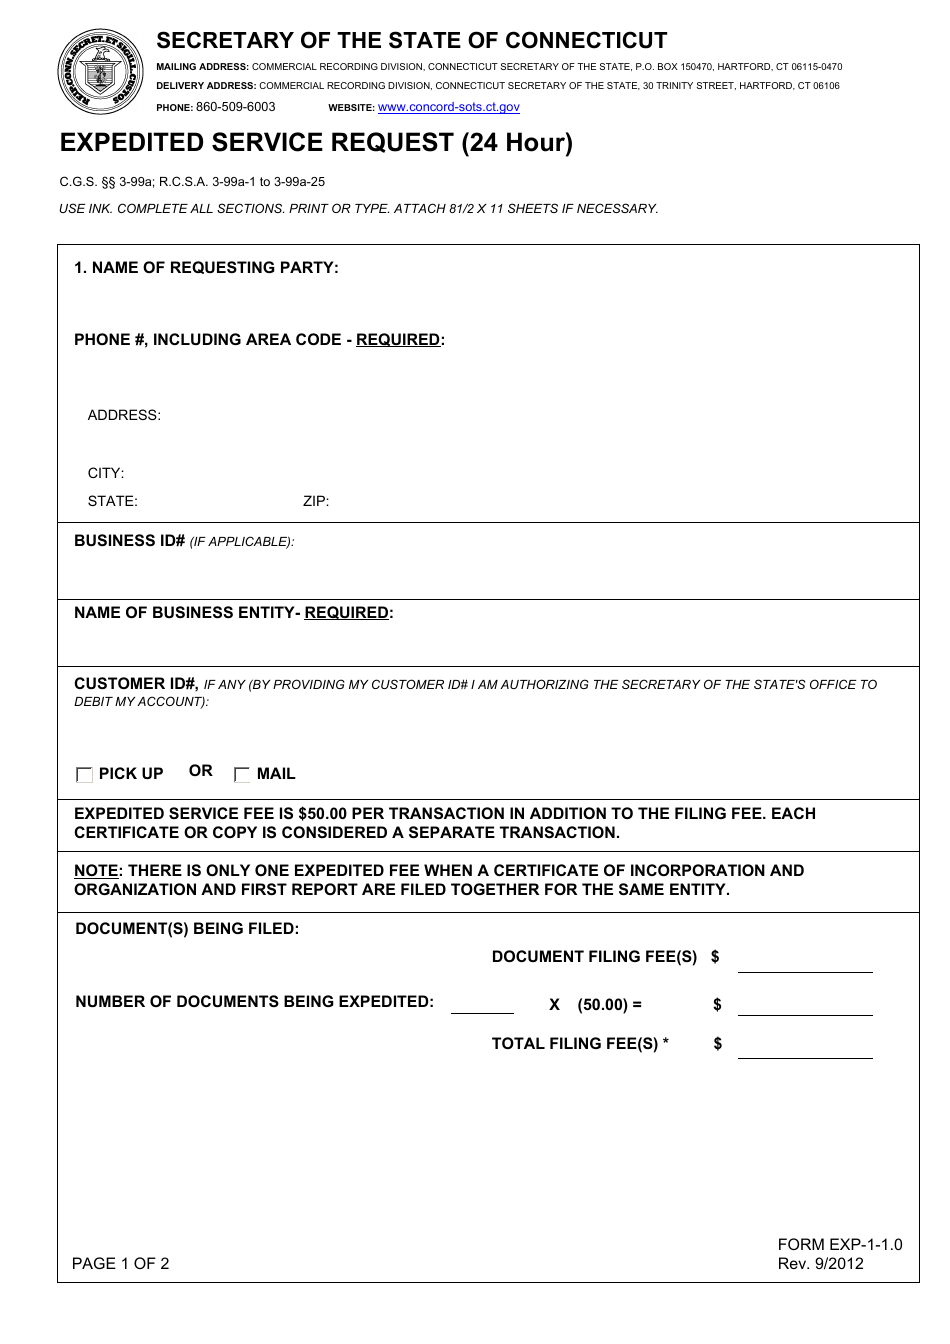 Form EXP-1-1.0 Expedited Service Request (24 Hour) - Connecticut, Page 1